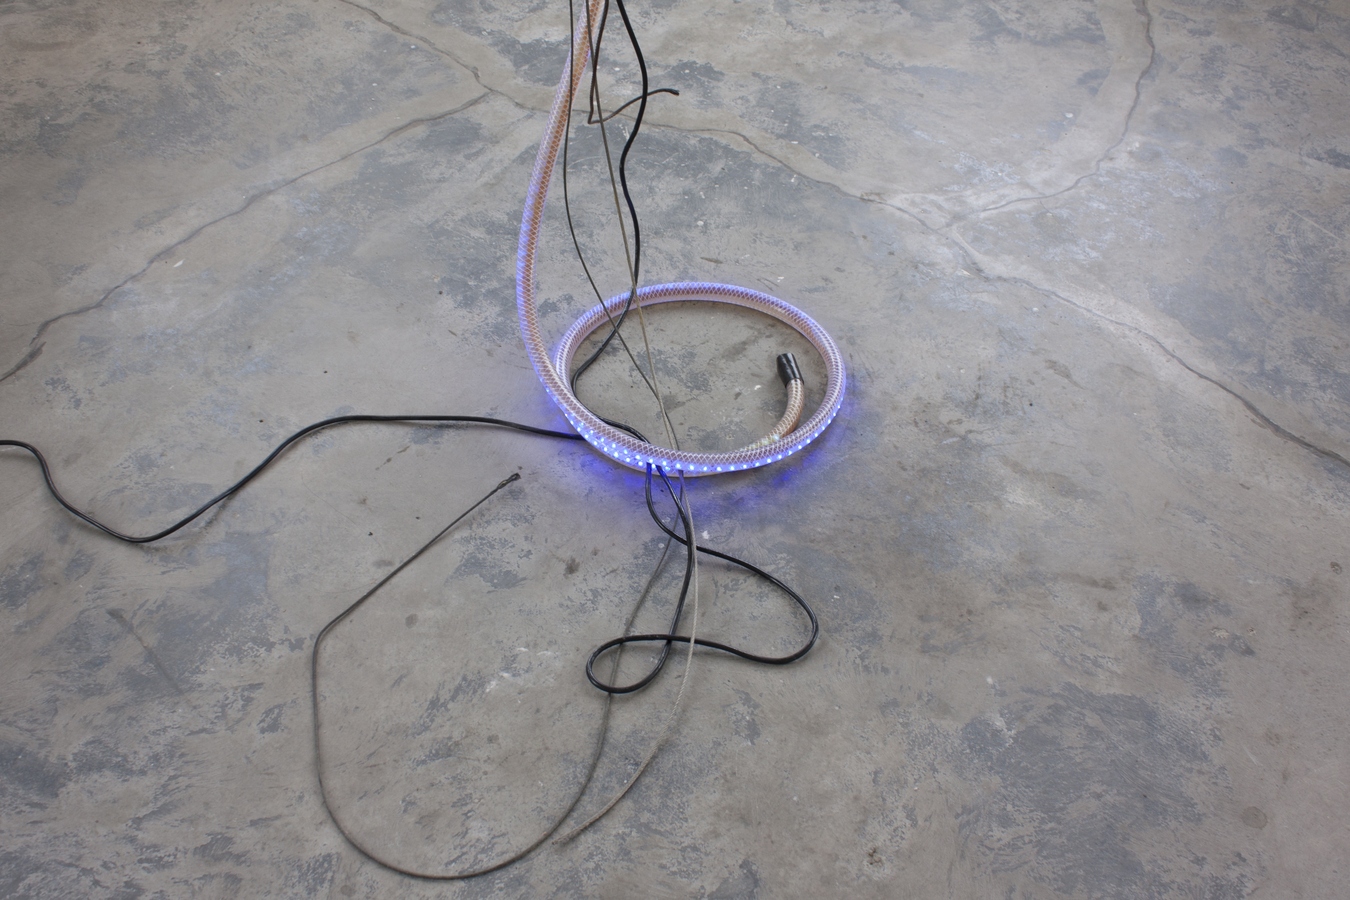 Zoë Paul, LO, Wool on found grill, plastic piping, LED tape, electrics, steel cables, petroleum jelly, oil thickener (detail) 2015